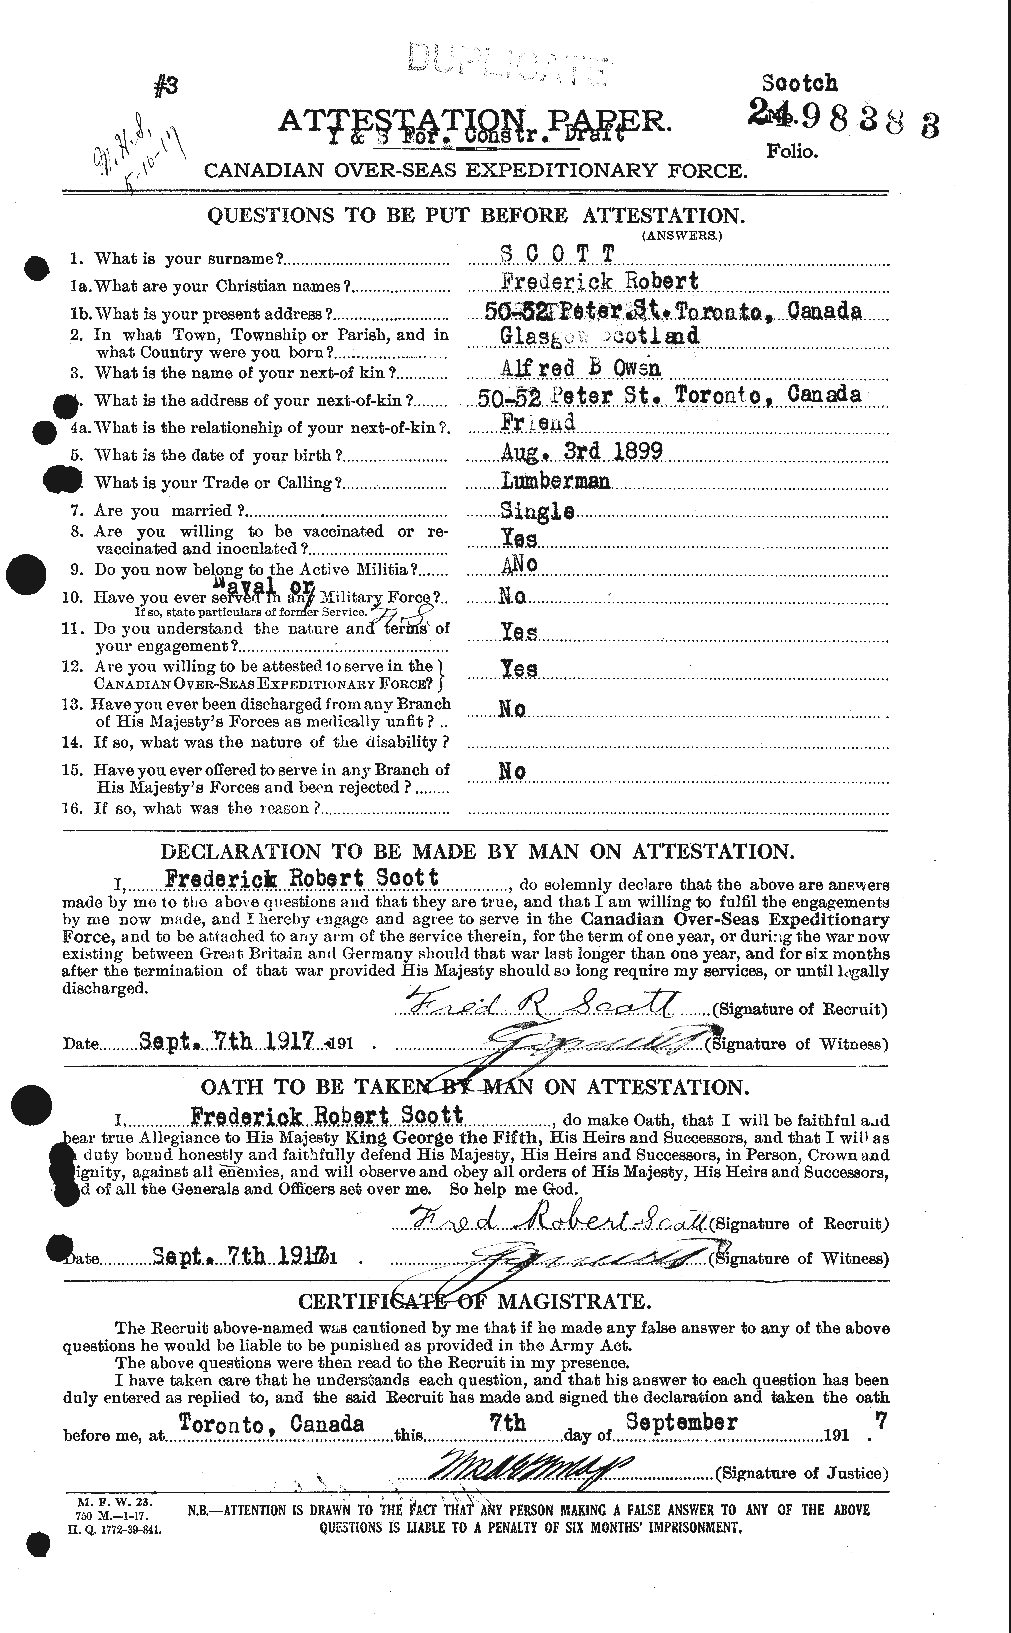 Personnel Records of the First World War - CEF 084383a